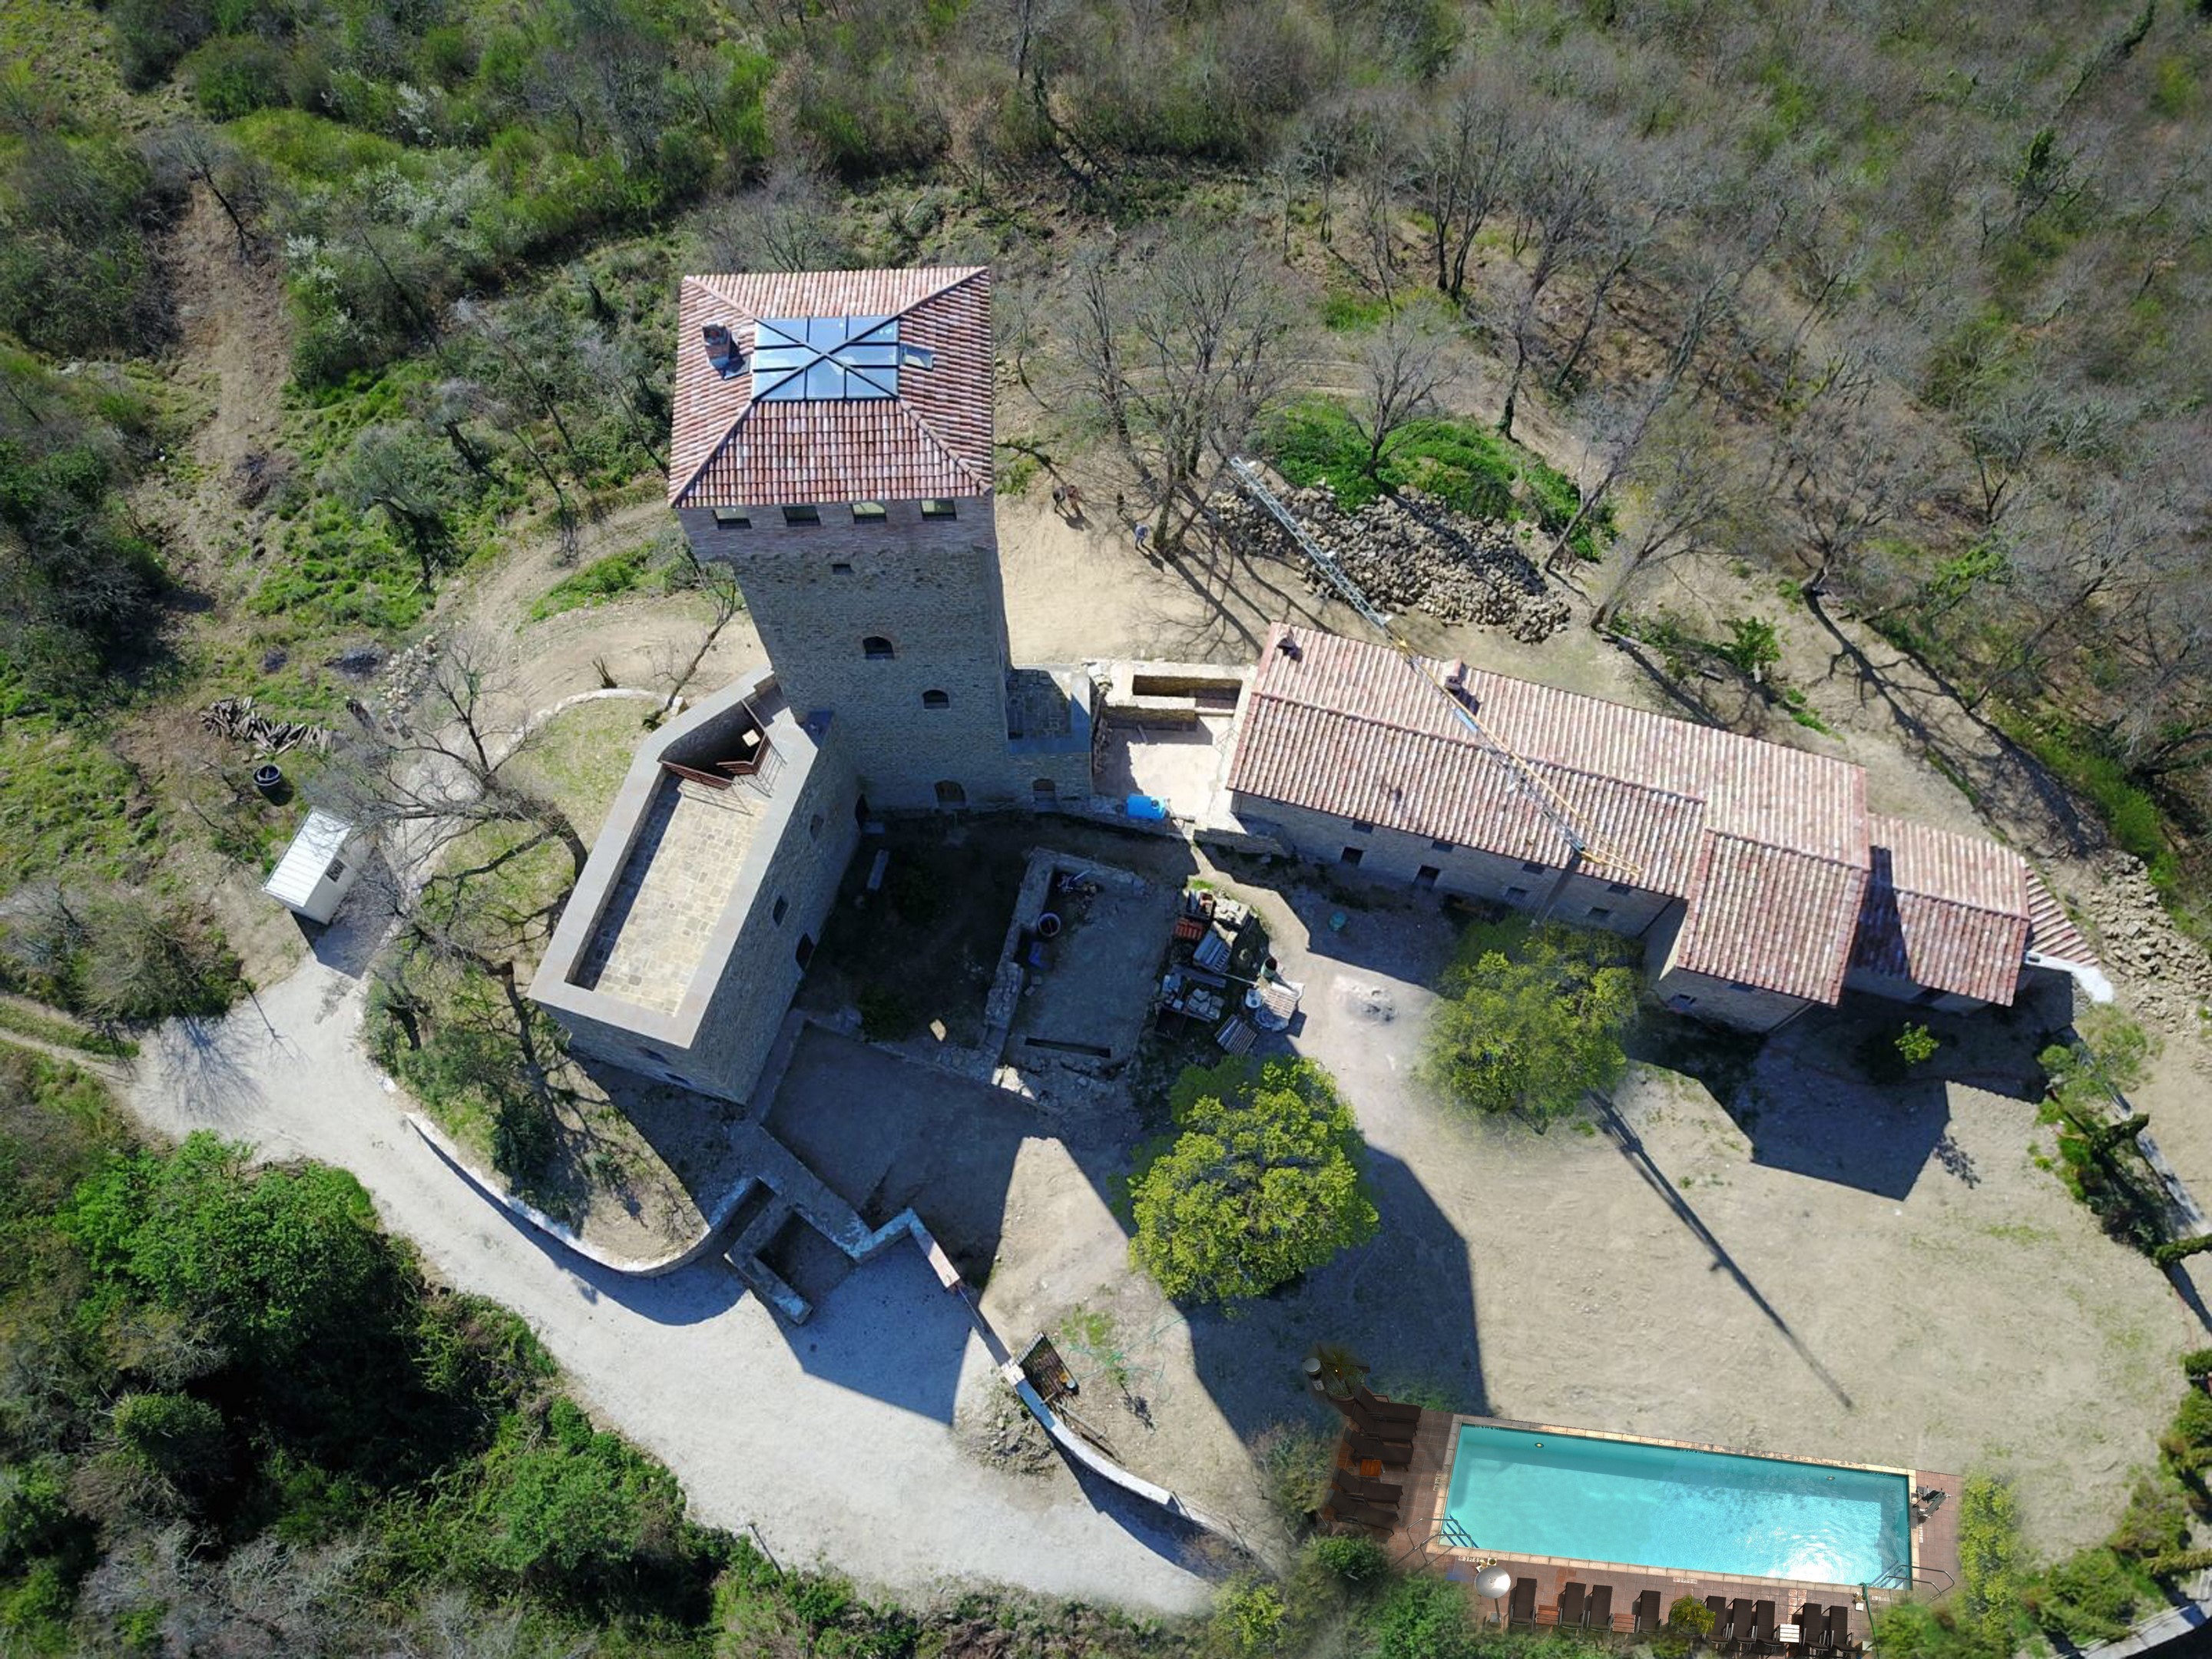 7 bedroom Castle for sale with panoramic view in Passignano sul Trasimeno, Umbria